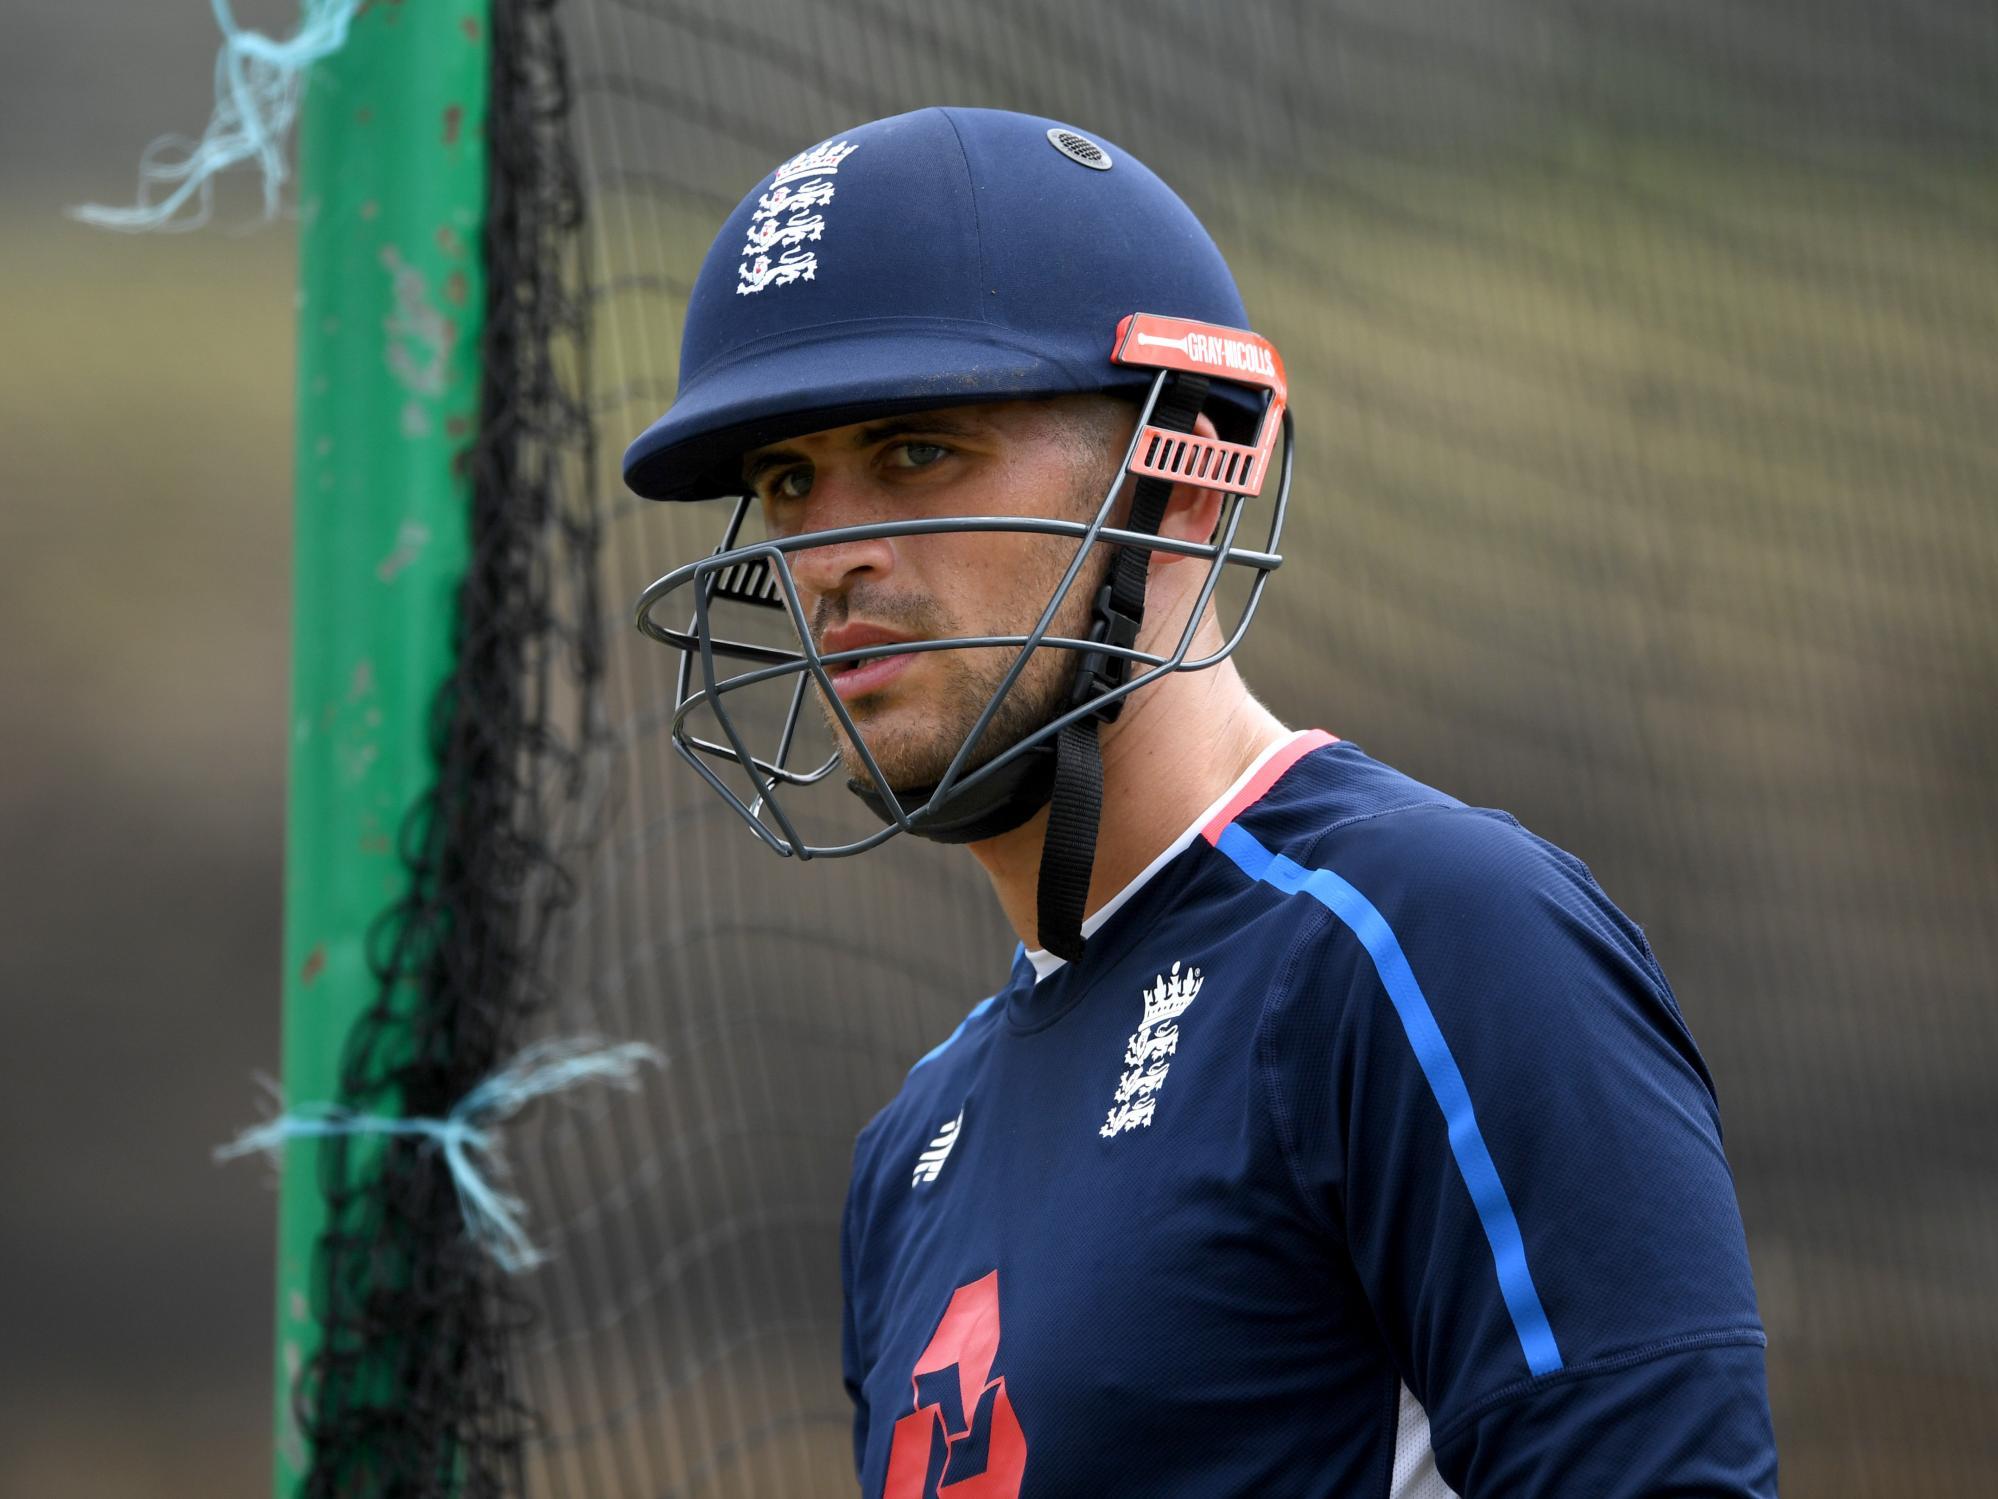 Alex Hales is unhappy with how England have treated him